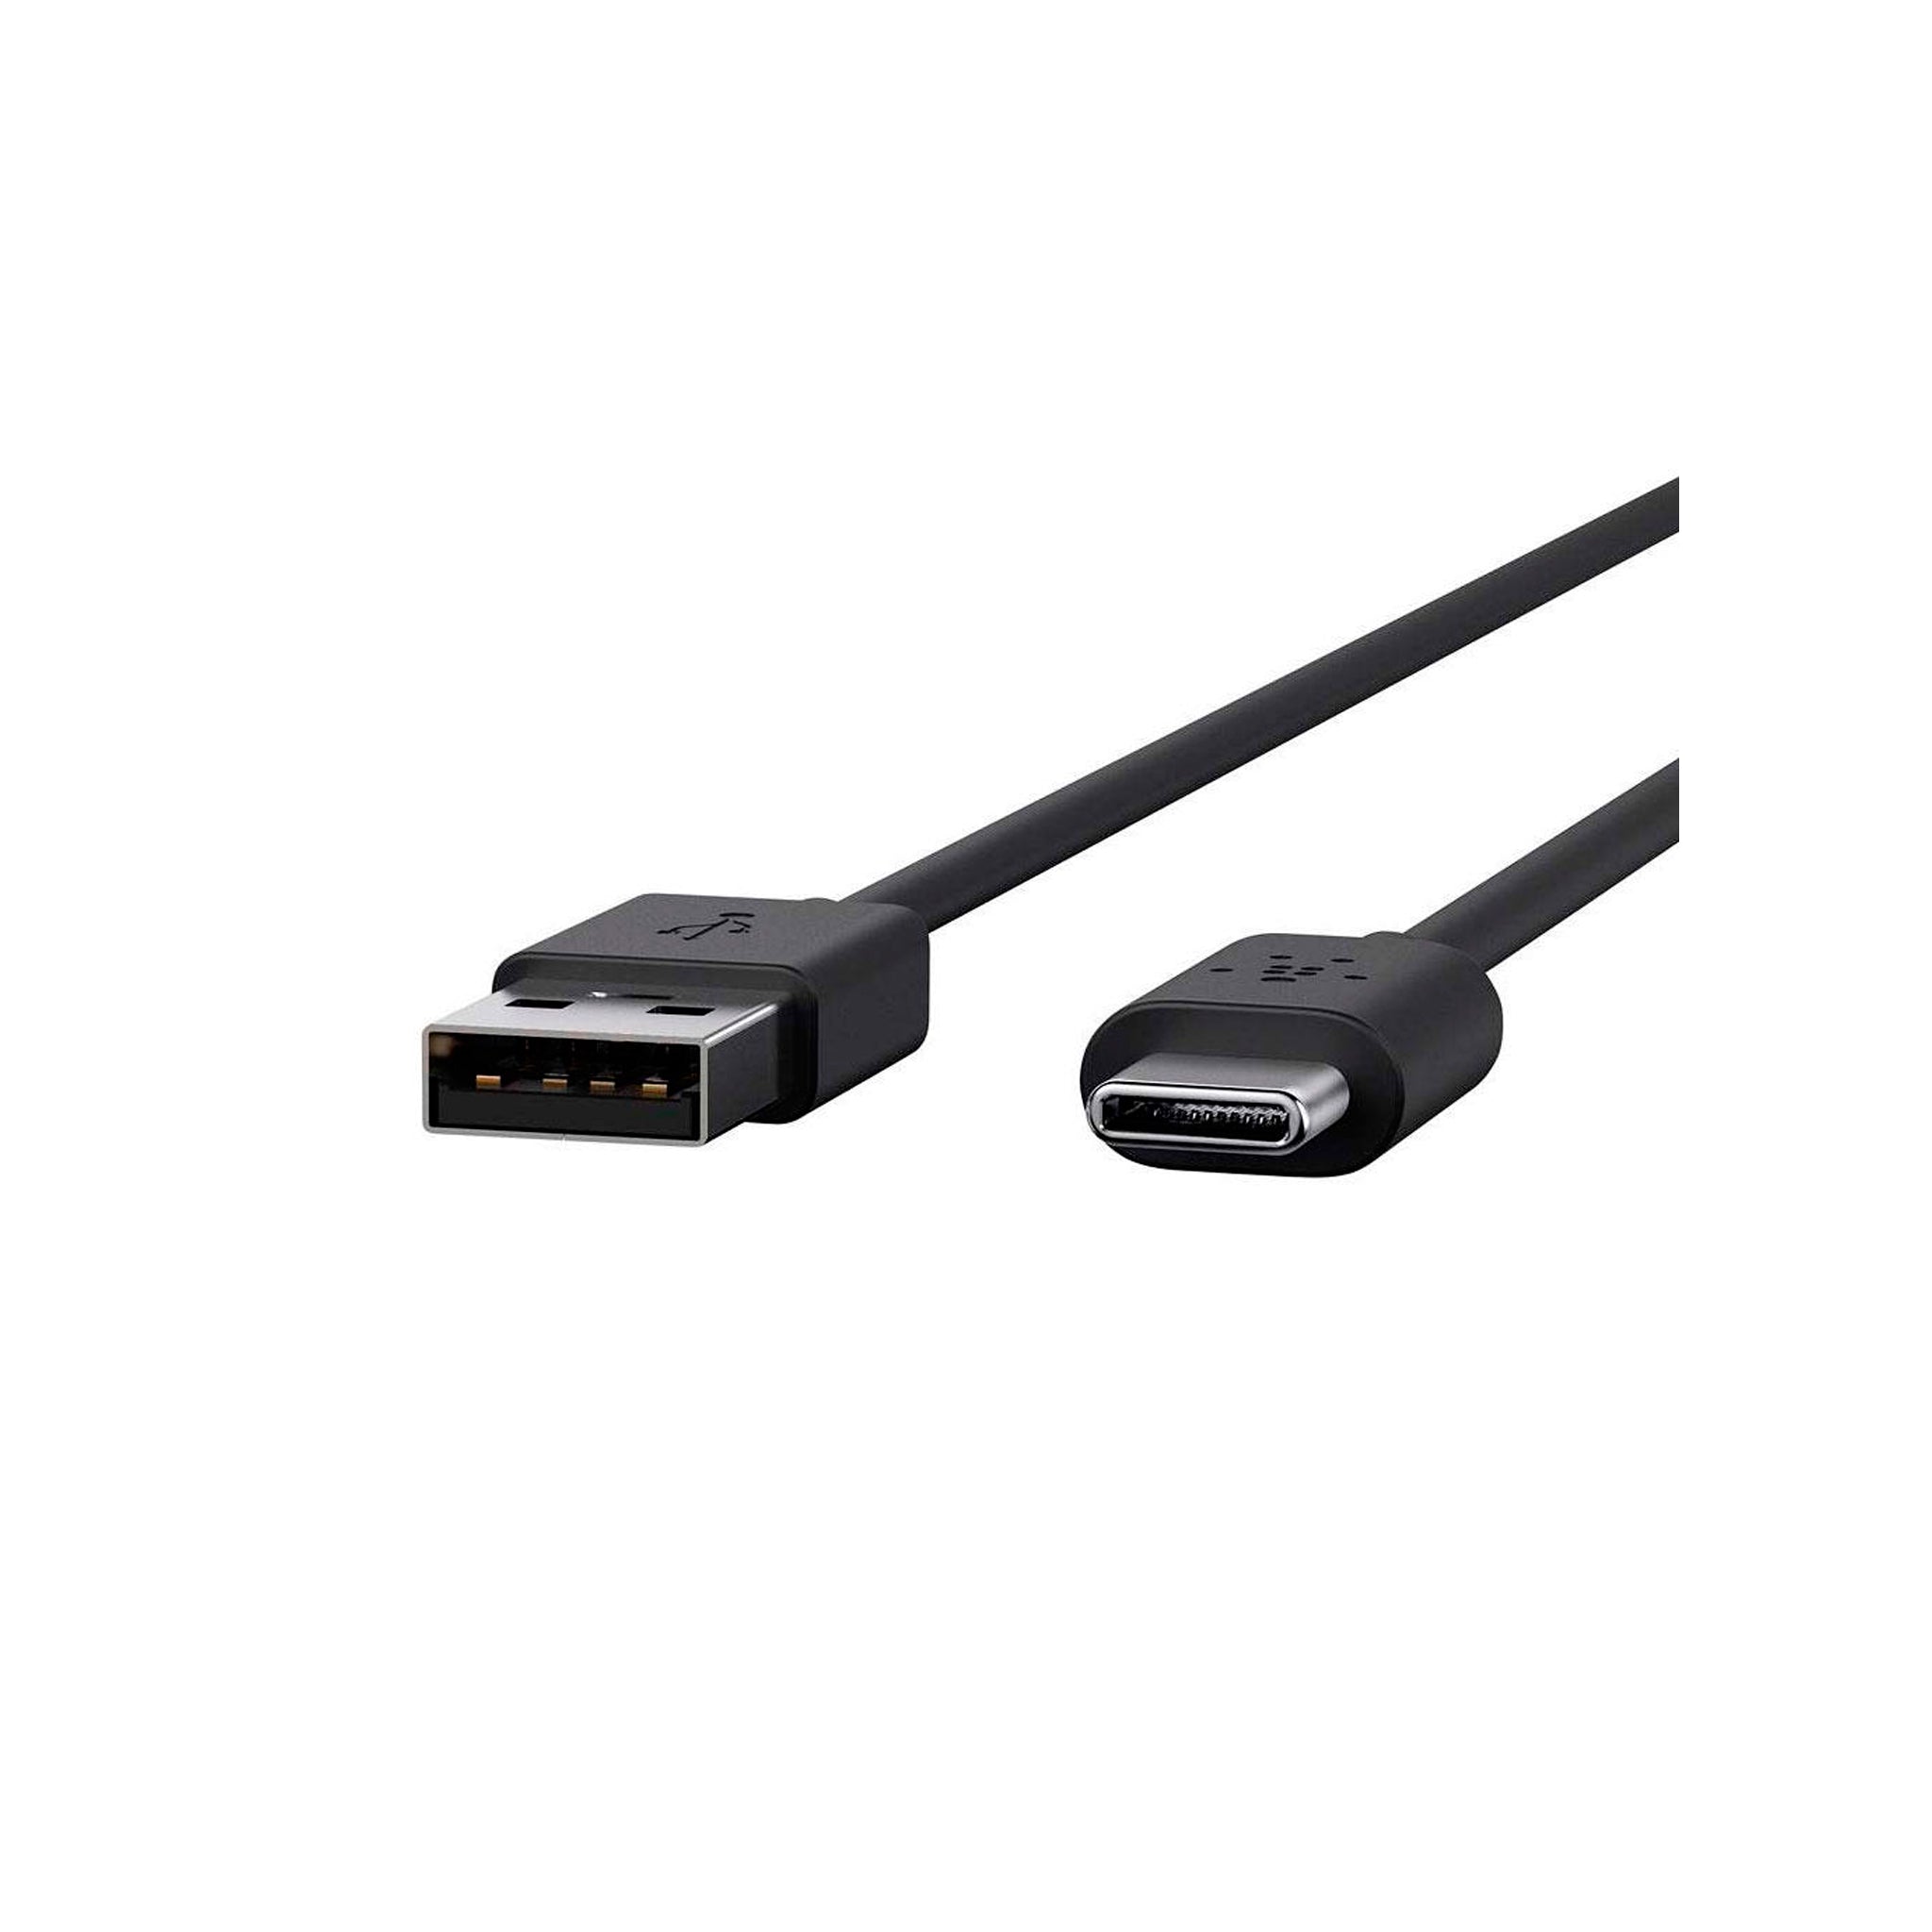 Belkin - Usb A To Usb C 2.0 Cable 6ft - Black